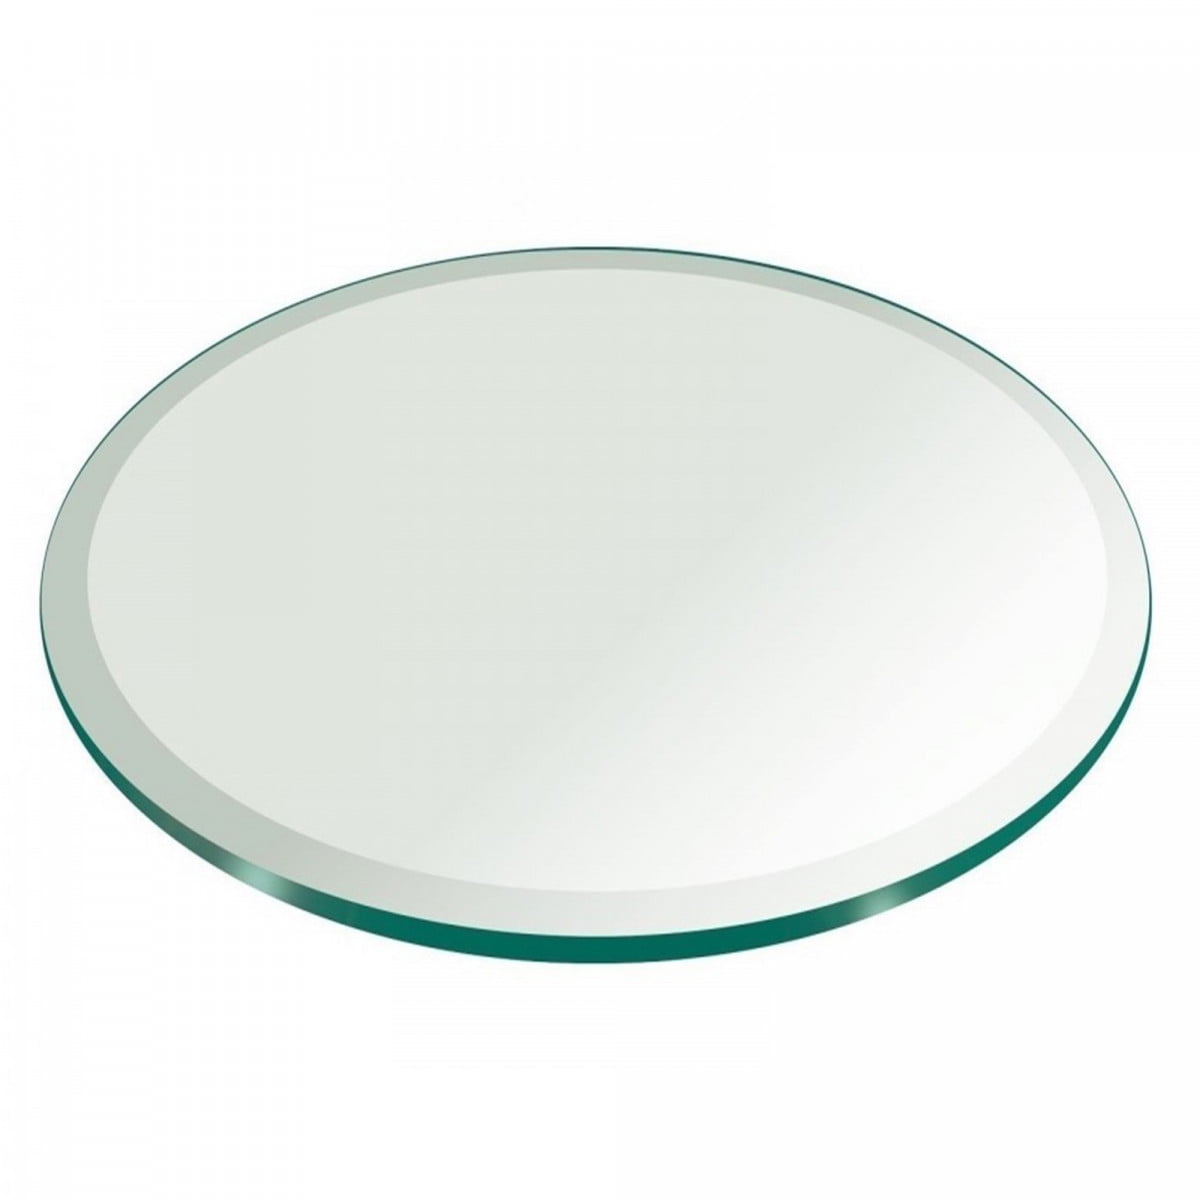 50 Inch Round Glass Table Top 1 2, 50 Inch Round Plexiglass Table Top